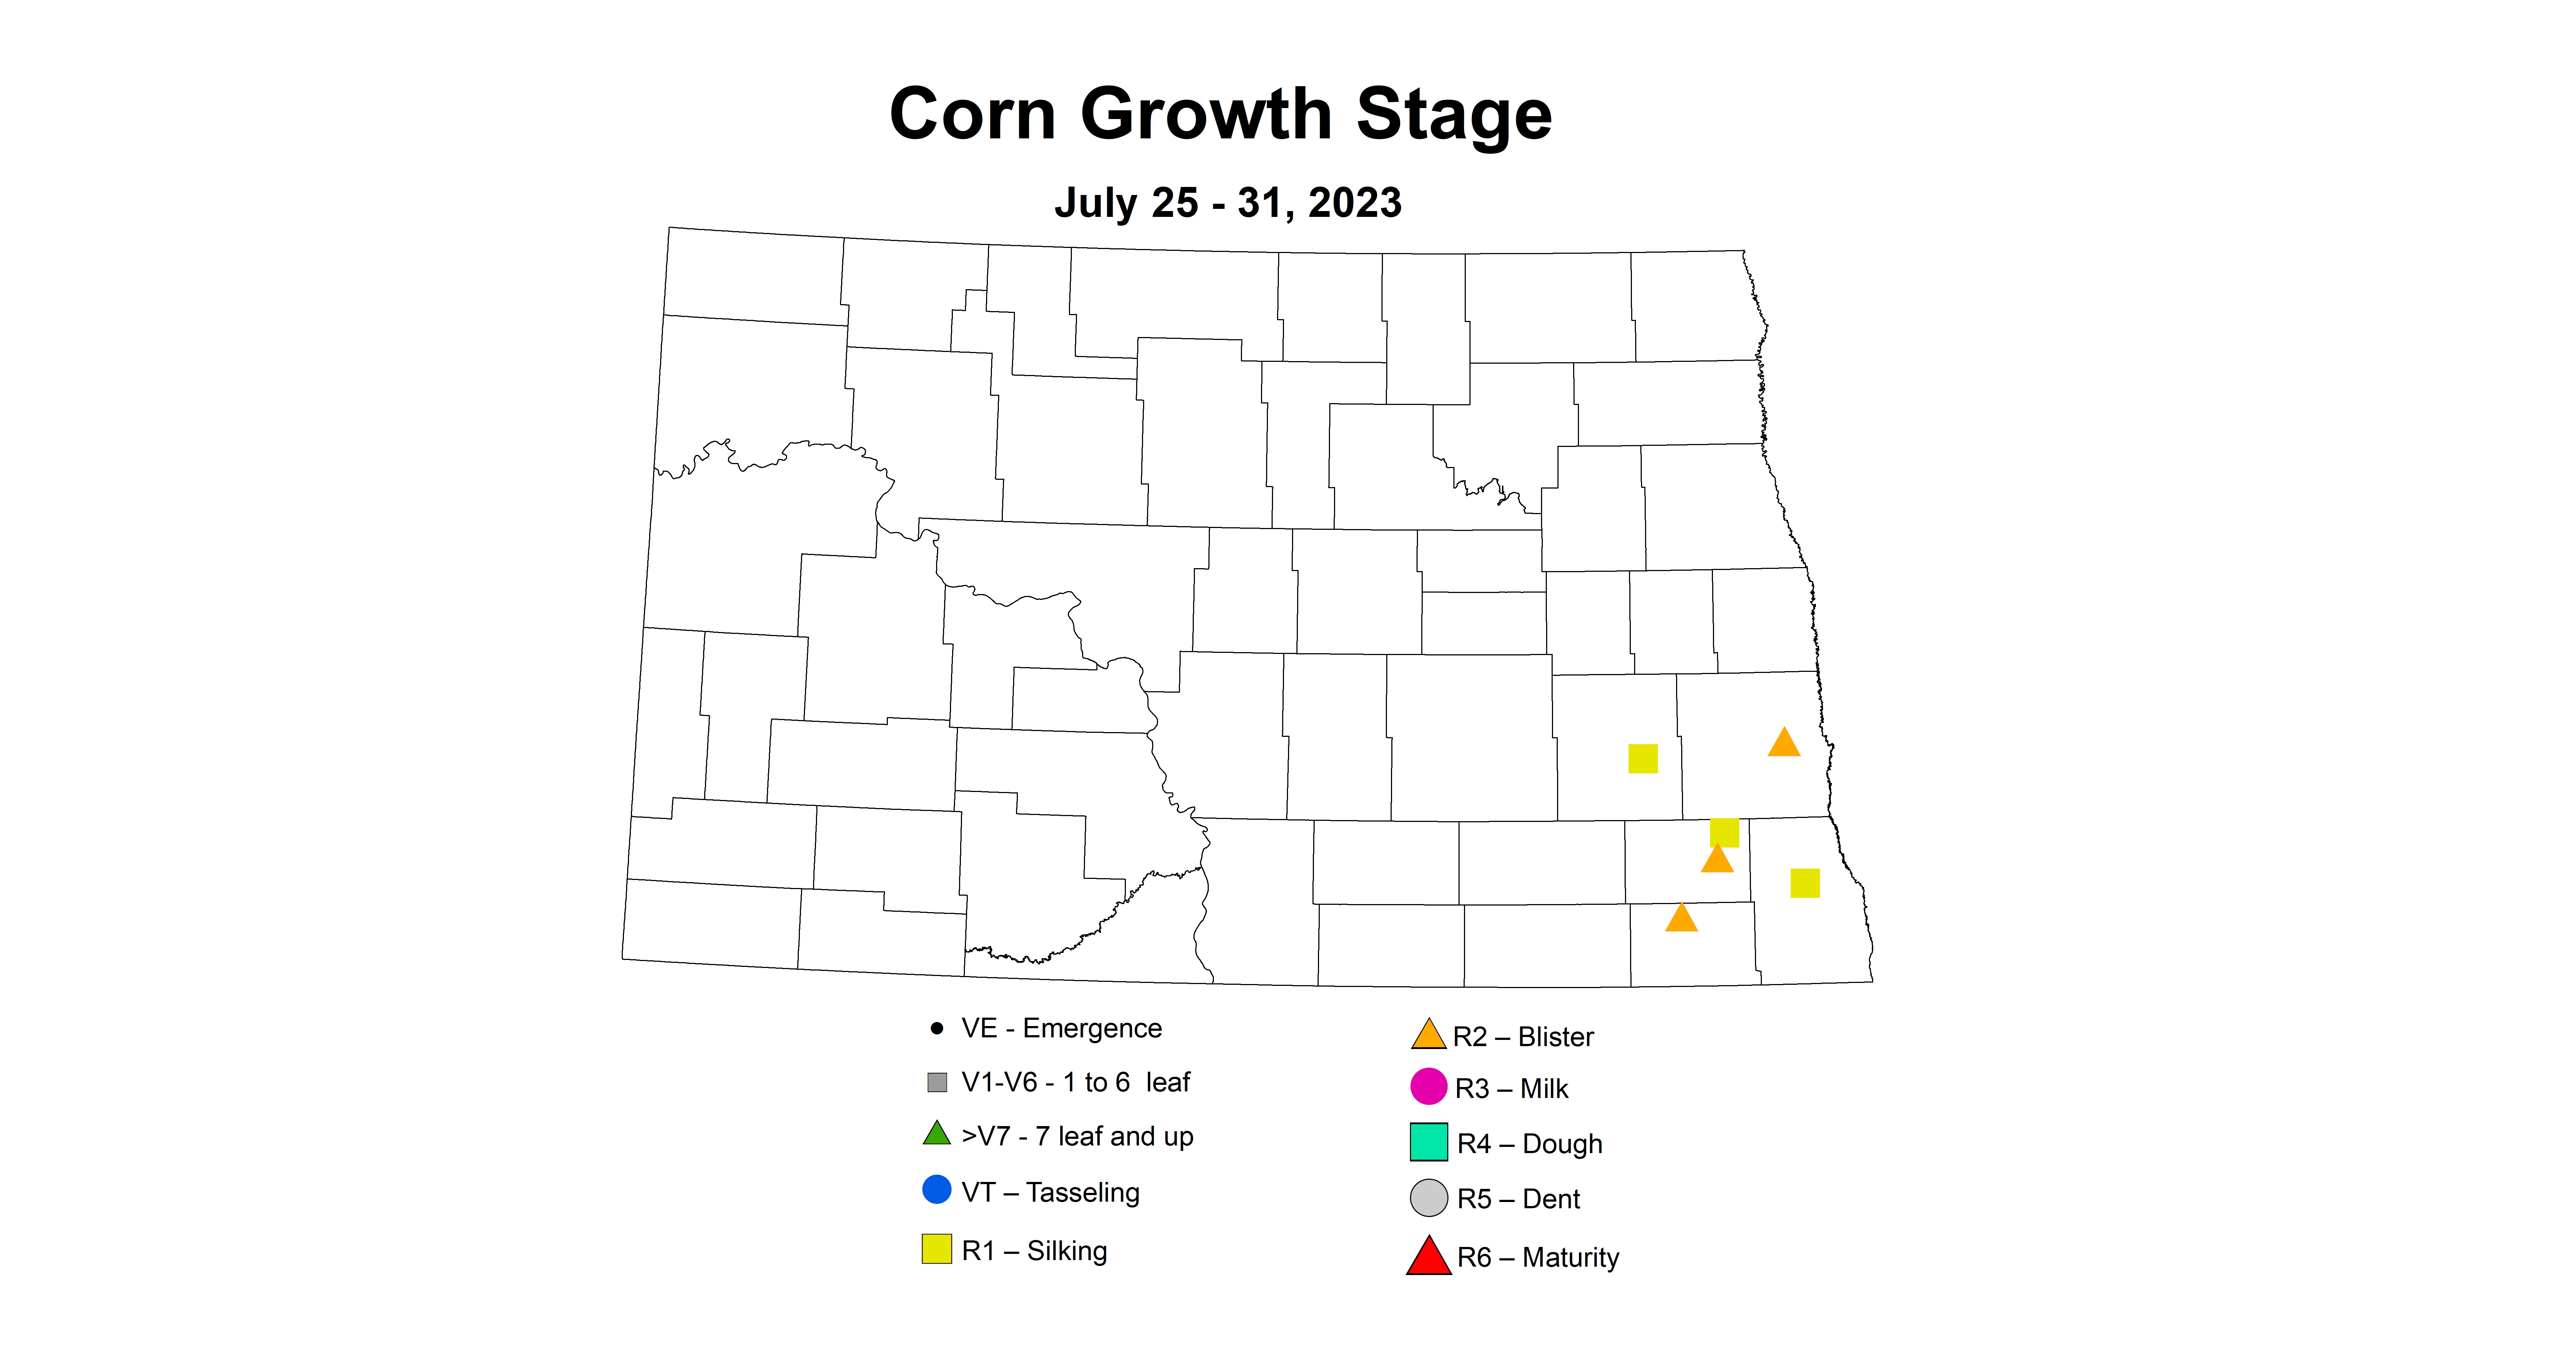 corn growth stages 7.25-7.31 2023